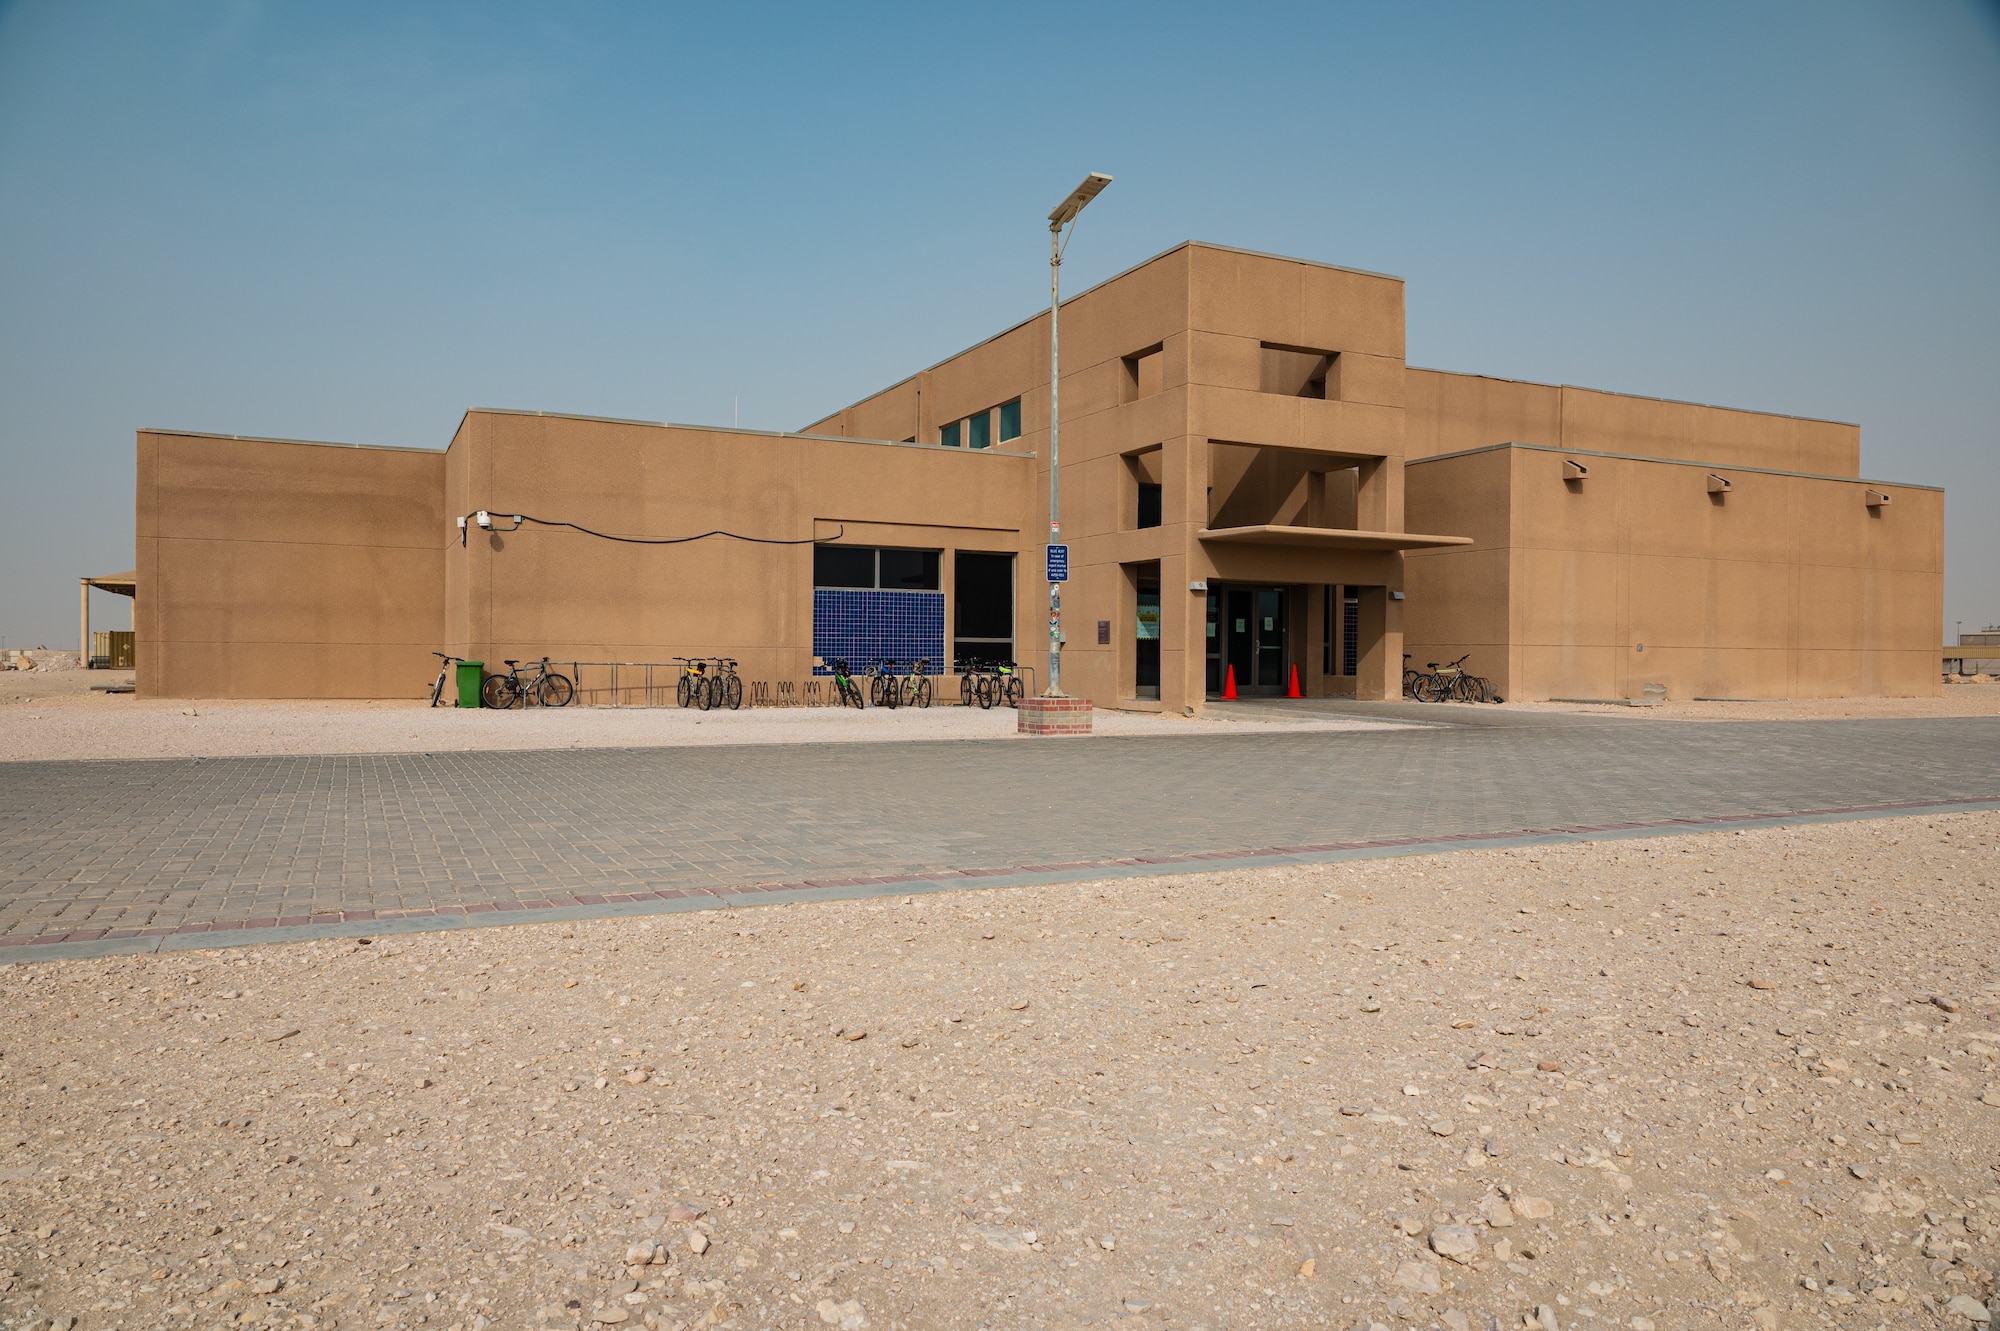 The Blatchford-Preston Complex Gym on Al Udeid Air Base, Qatar, 19 July 2022, is undergoing renovations both functional and aesthetic. The renovations have included a new rubberized track and a turf soccer field behind the gym with all renovations have been set to conclude April 2023. (U.S. Air Force photo by Staff Sgt. Dana Tourtellotte)